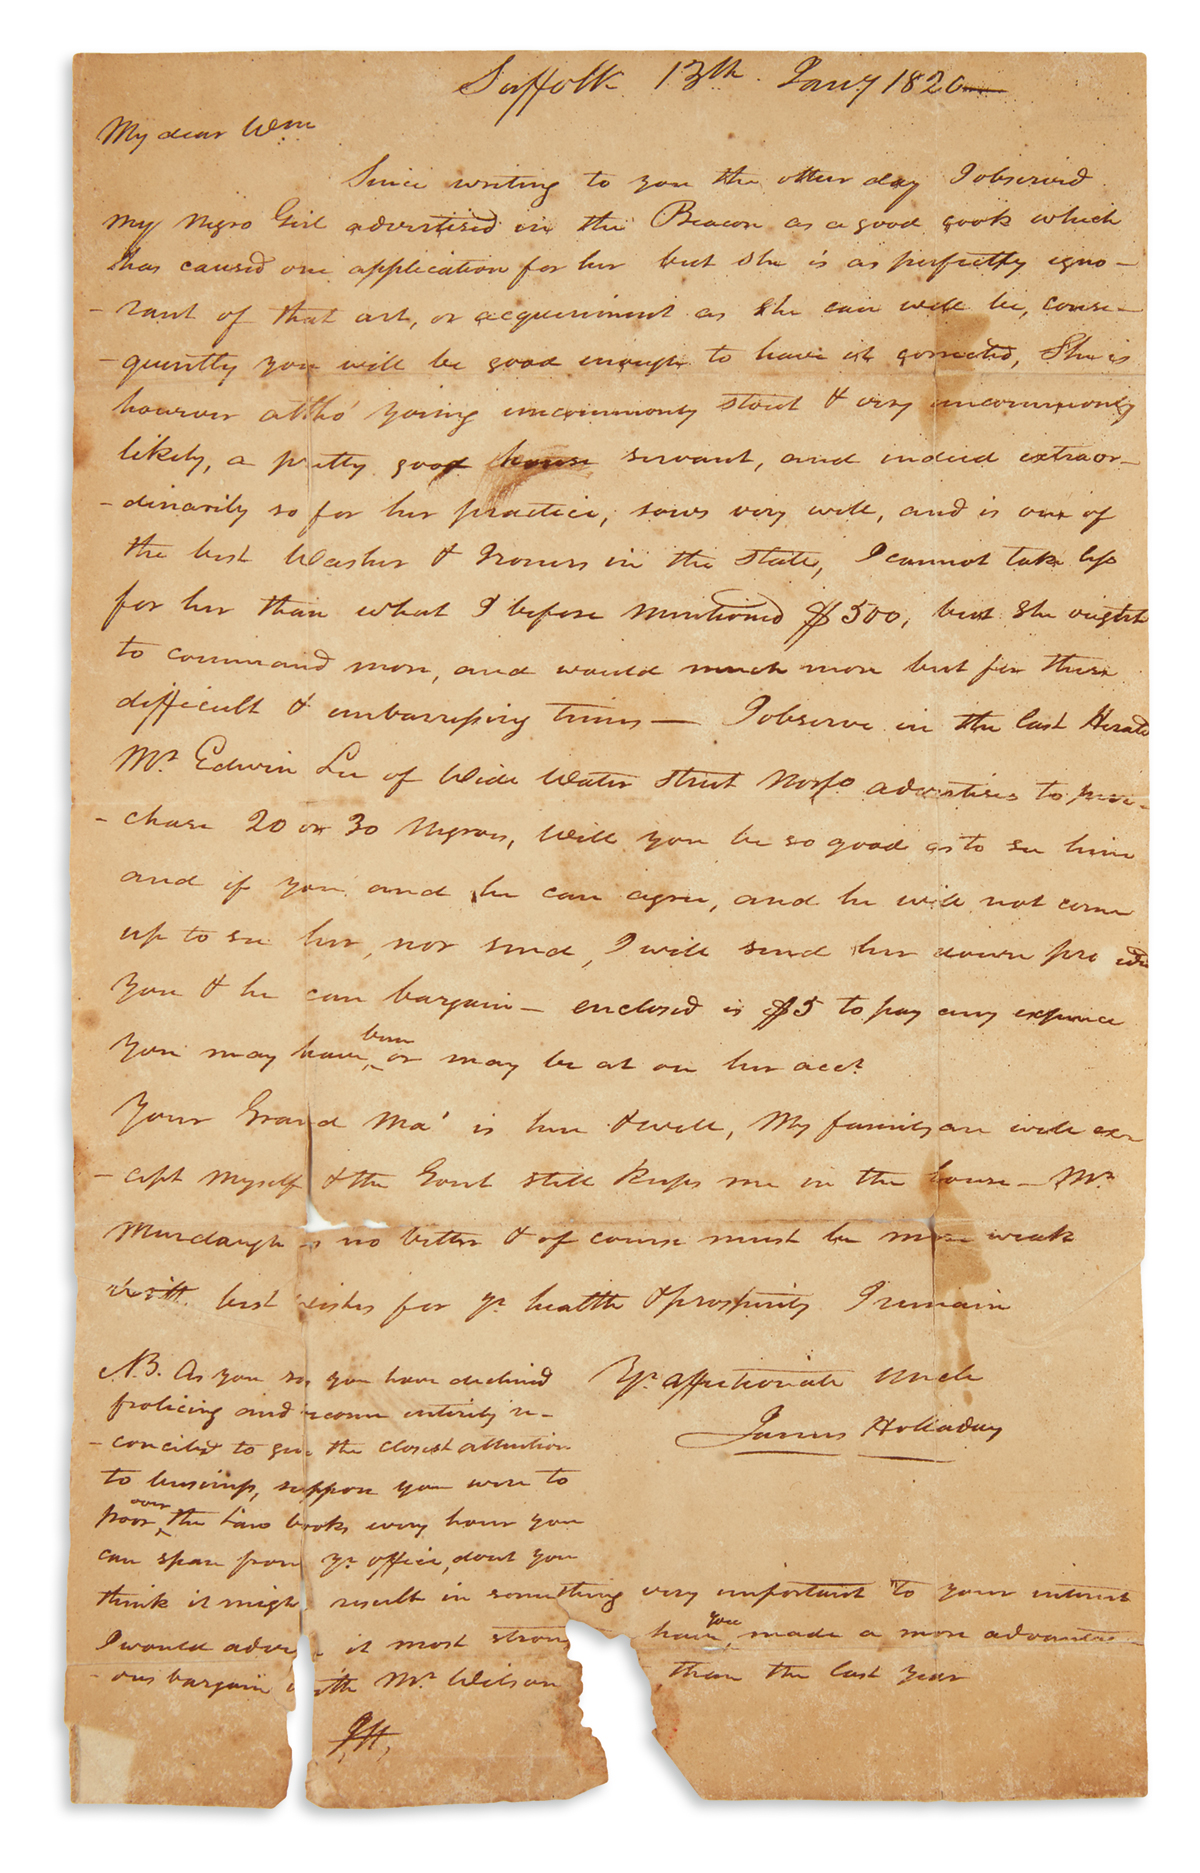 (SLAVERY AND ABOLITION.) Holladay, James. Letter describing his servant in detail for a sale advertisement.